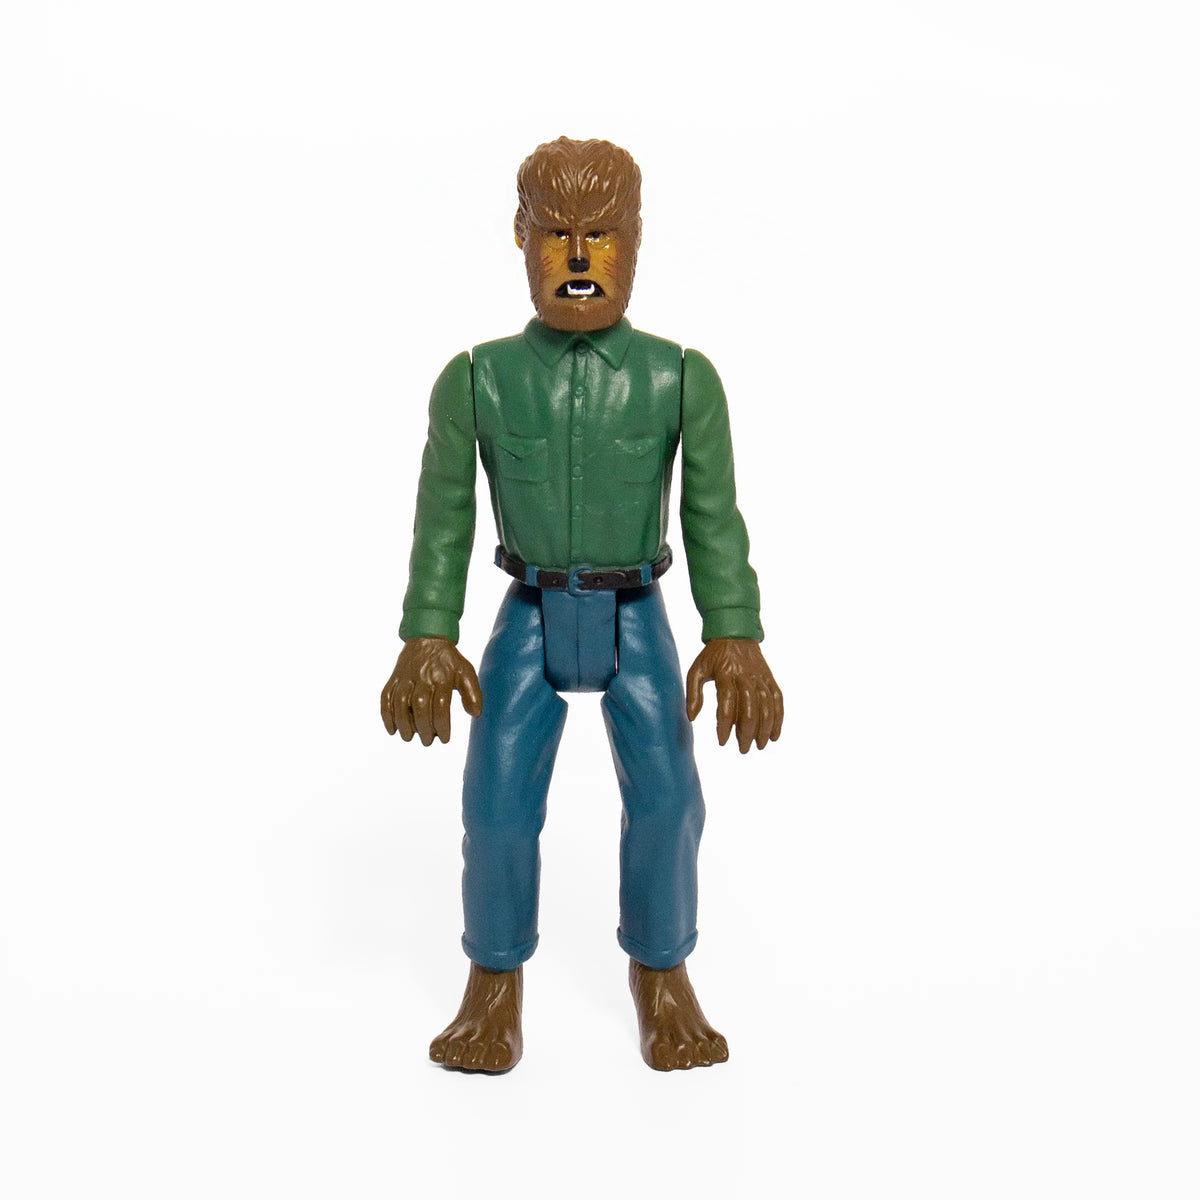 Universal Monsters ReAction Figure - The Wolf Man